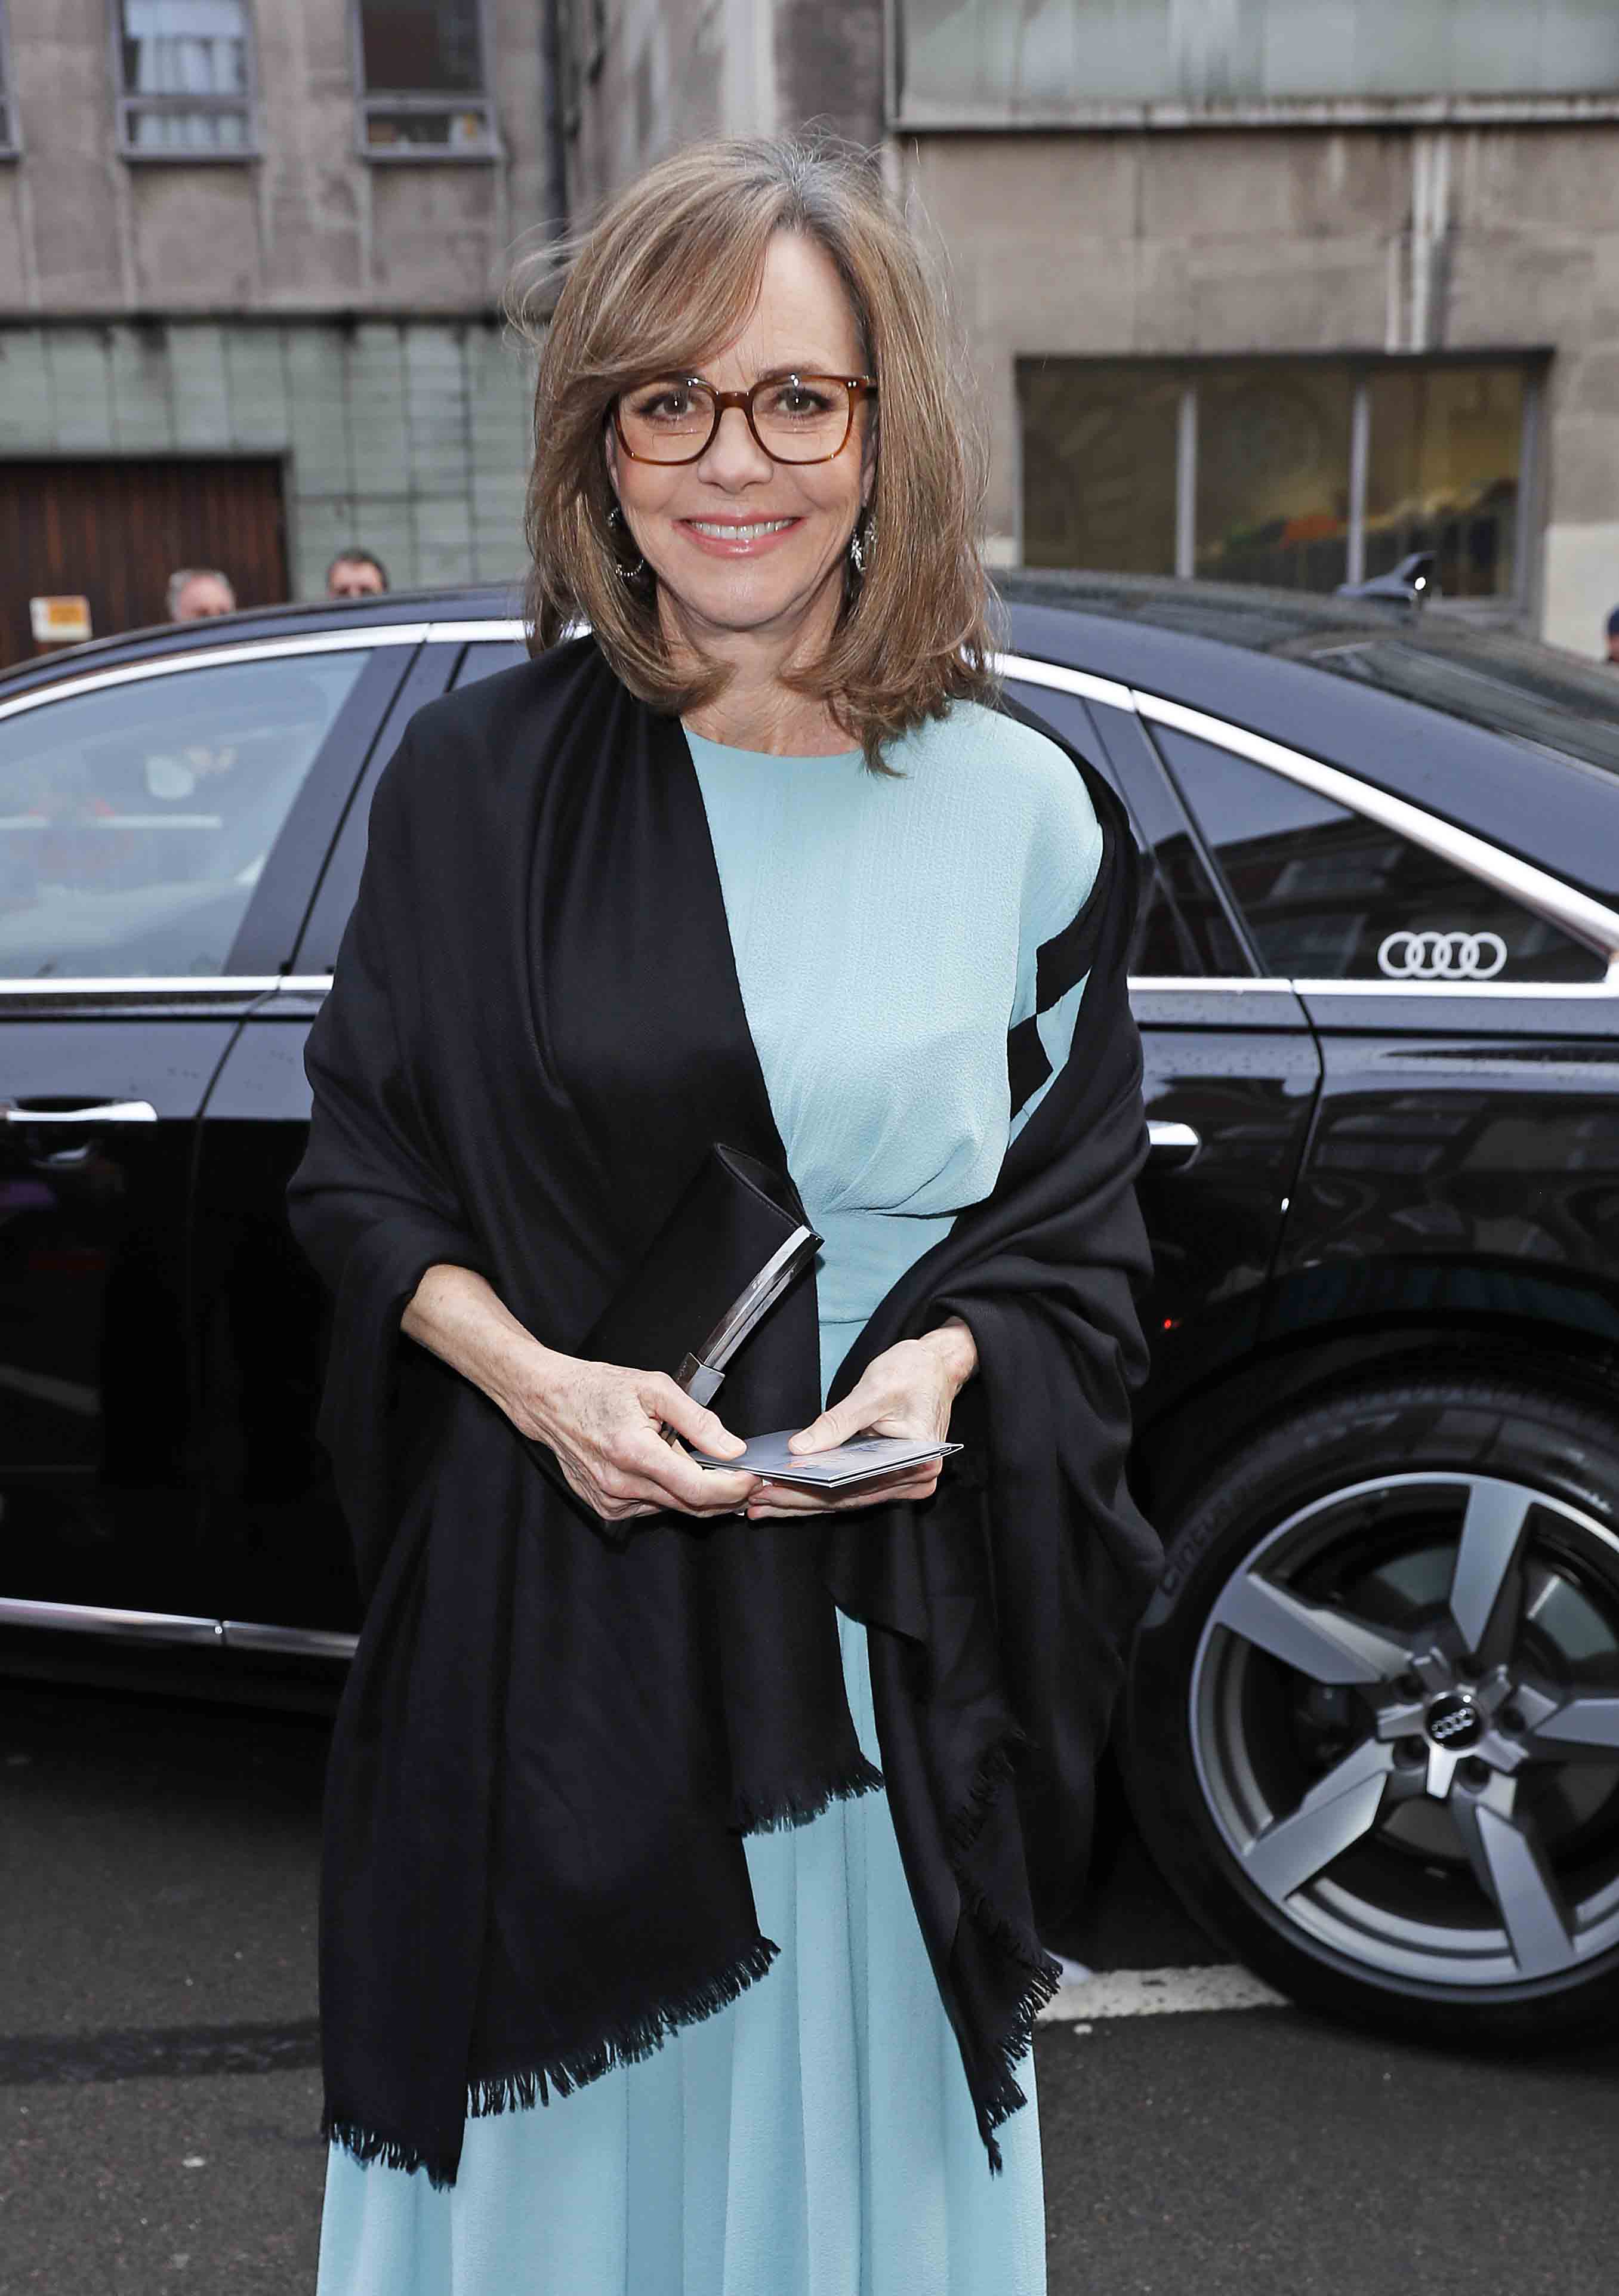 Sally Field am 07. April 2019, in London, England | Quelle: Getty Images